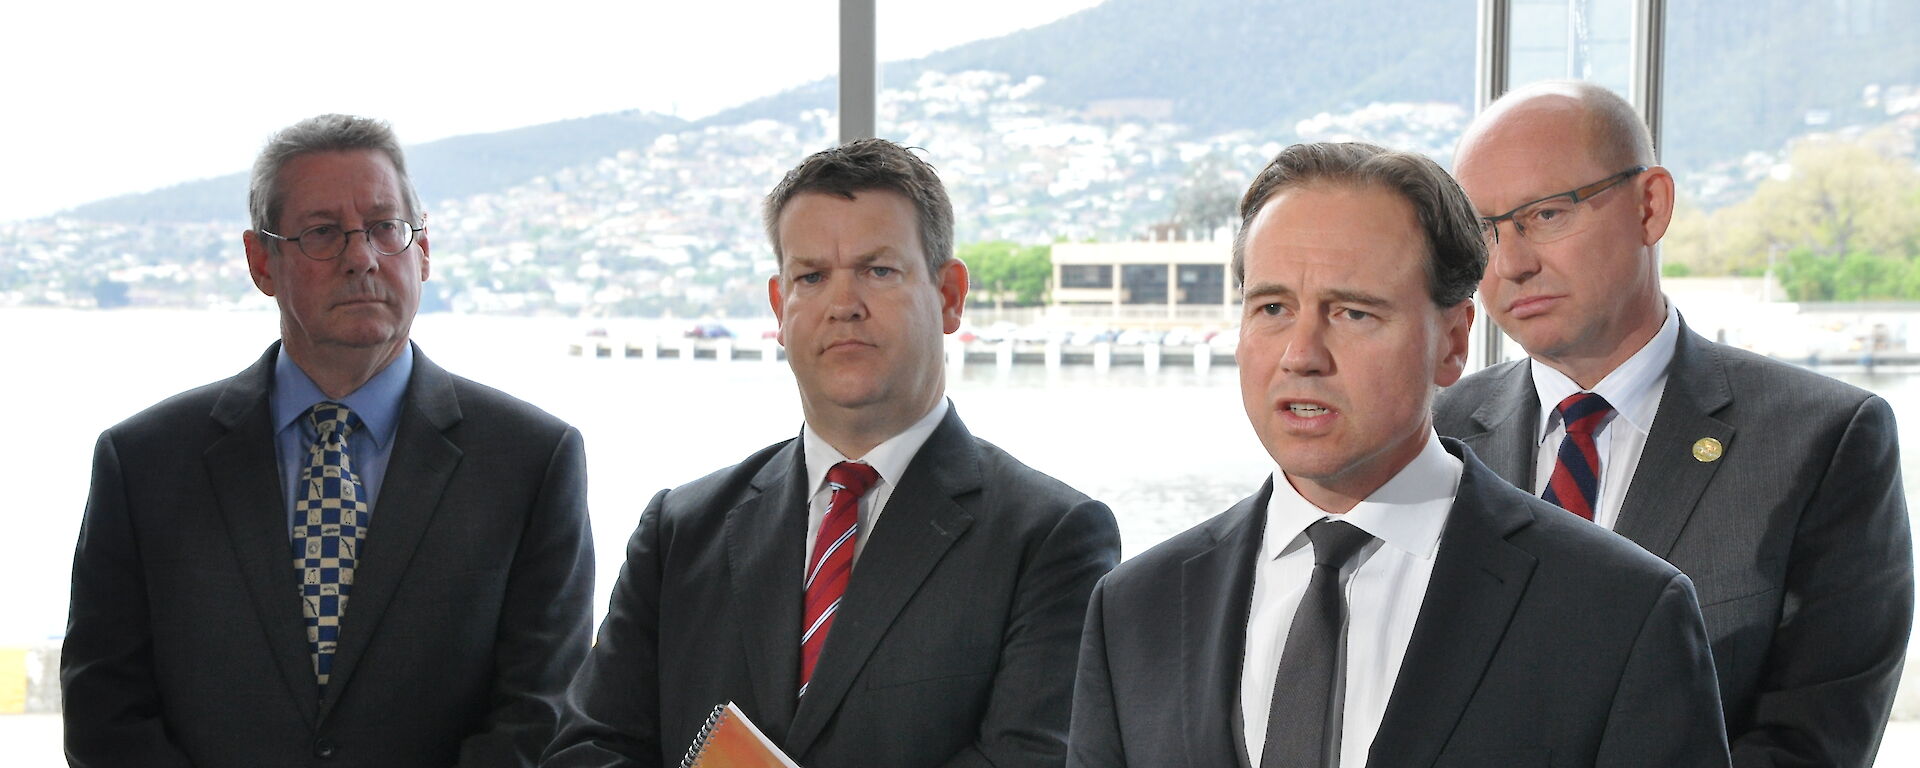 Environment Minister Greg Hunt speaking at the press conference